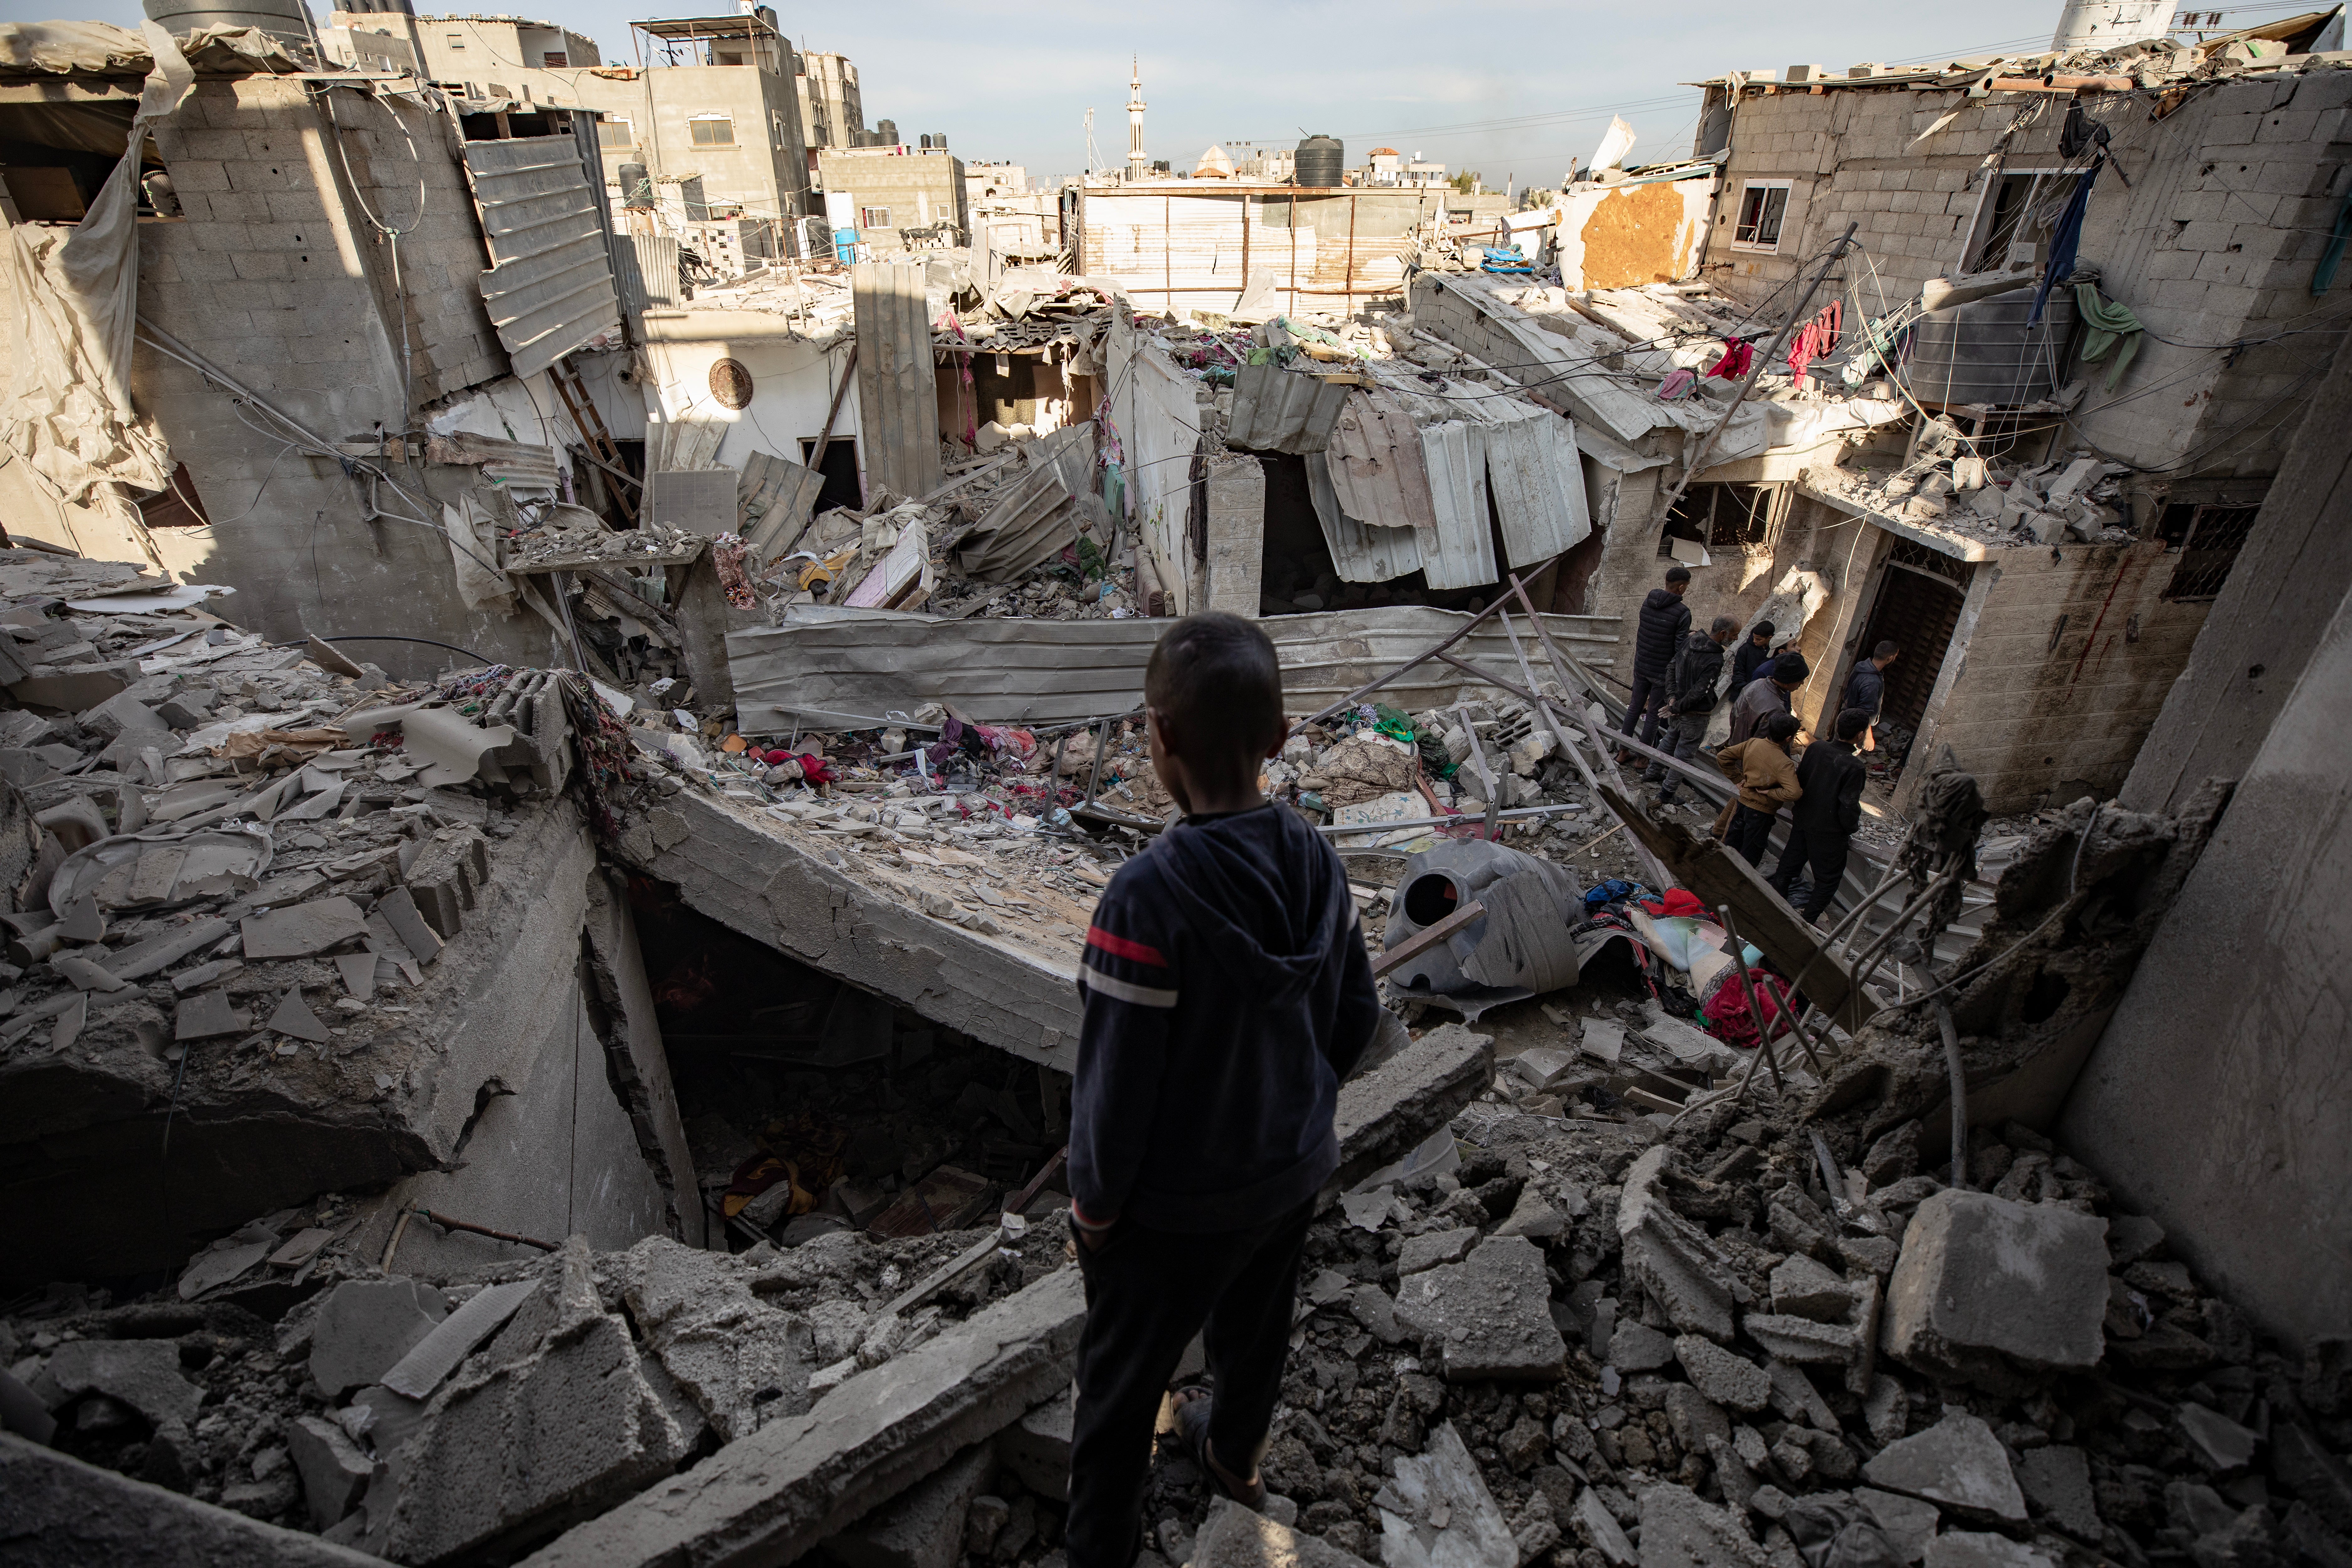 A child looks at rubble after Israeli airstrikes targeted Rafah, Gaza, overnight